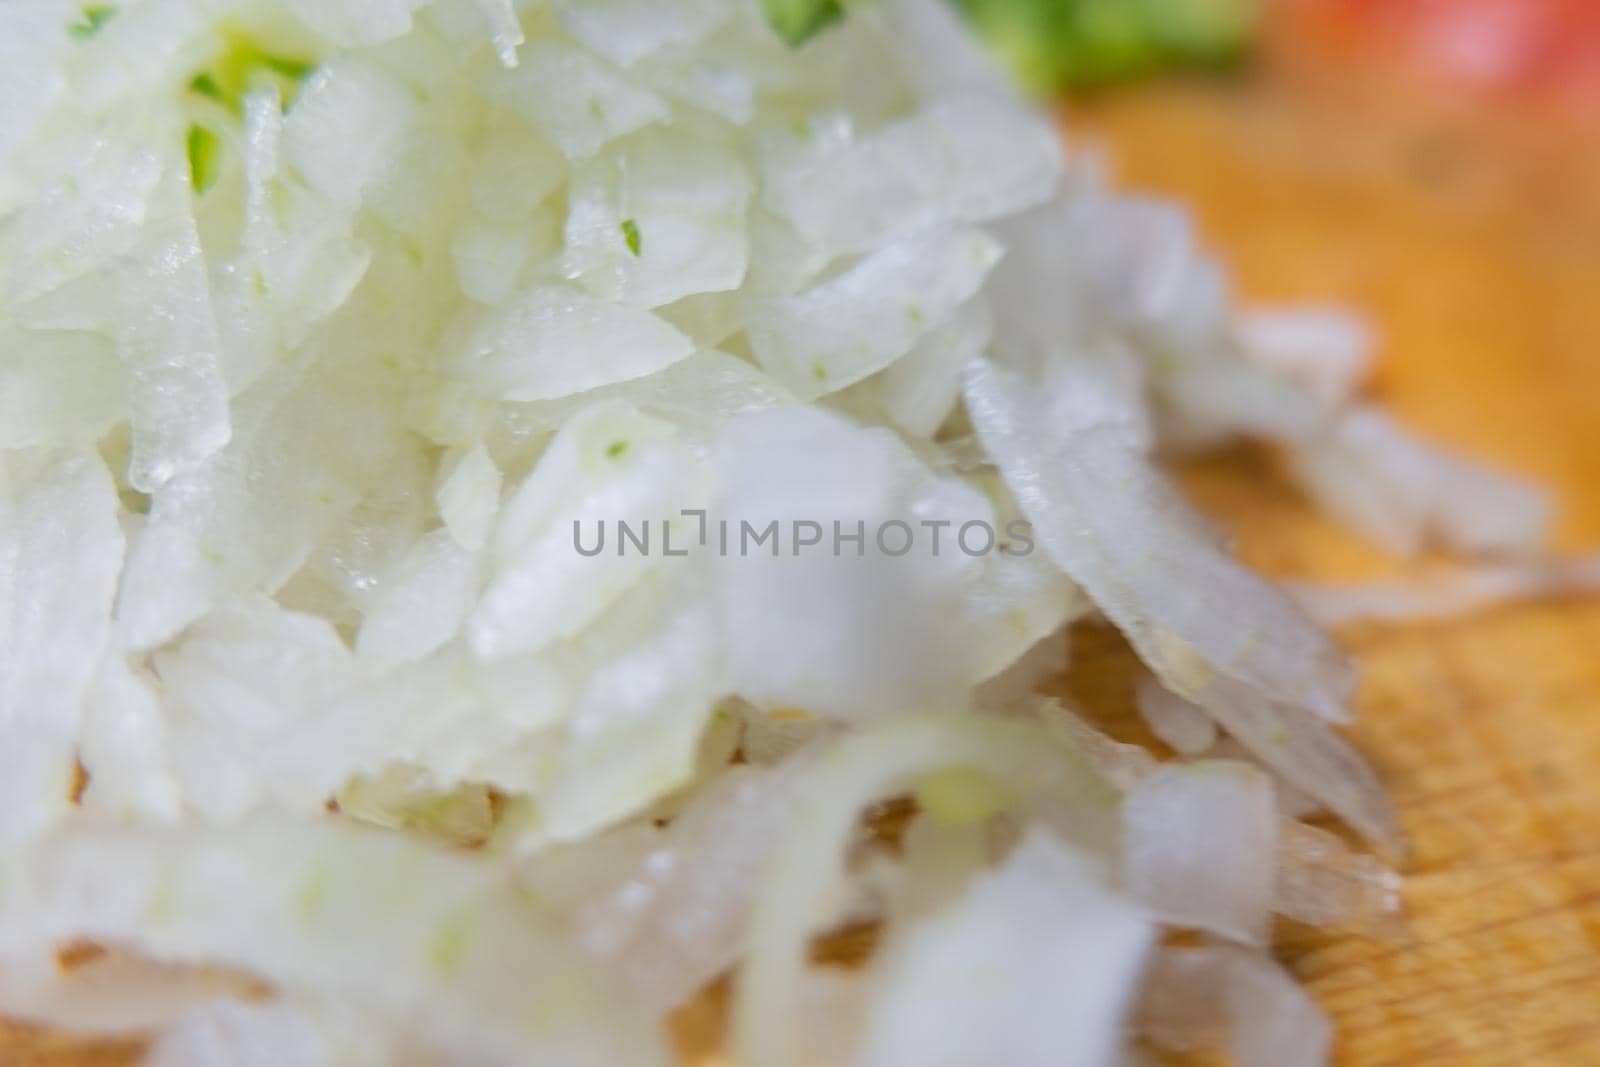 Close-up of chopped onions on wooden cutting board with blurry background. Fresh white vegetables cut into pieces above wood surface. Traditional sauce preparation